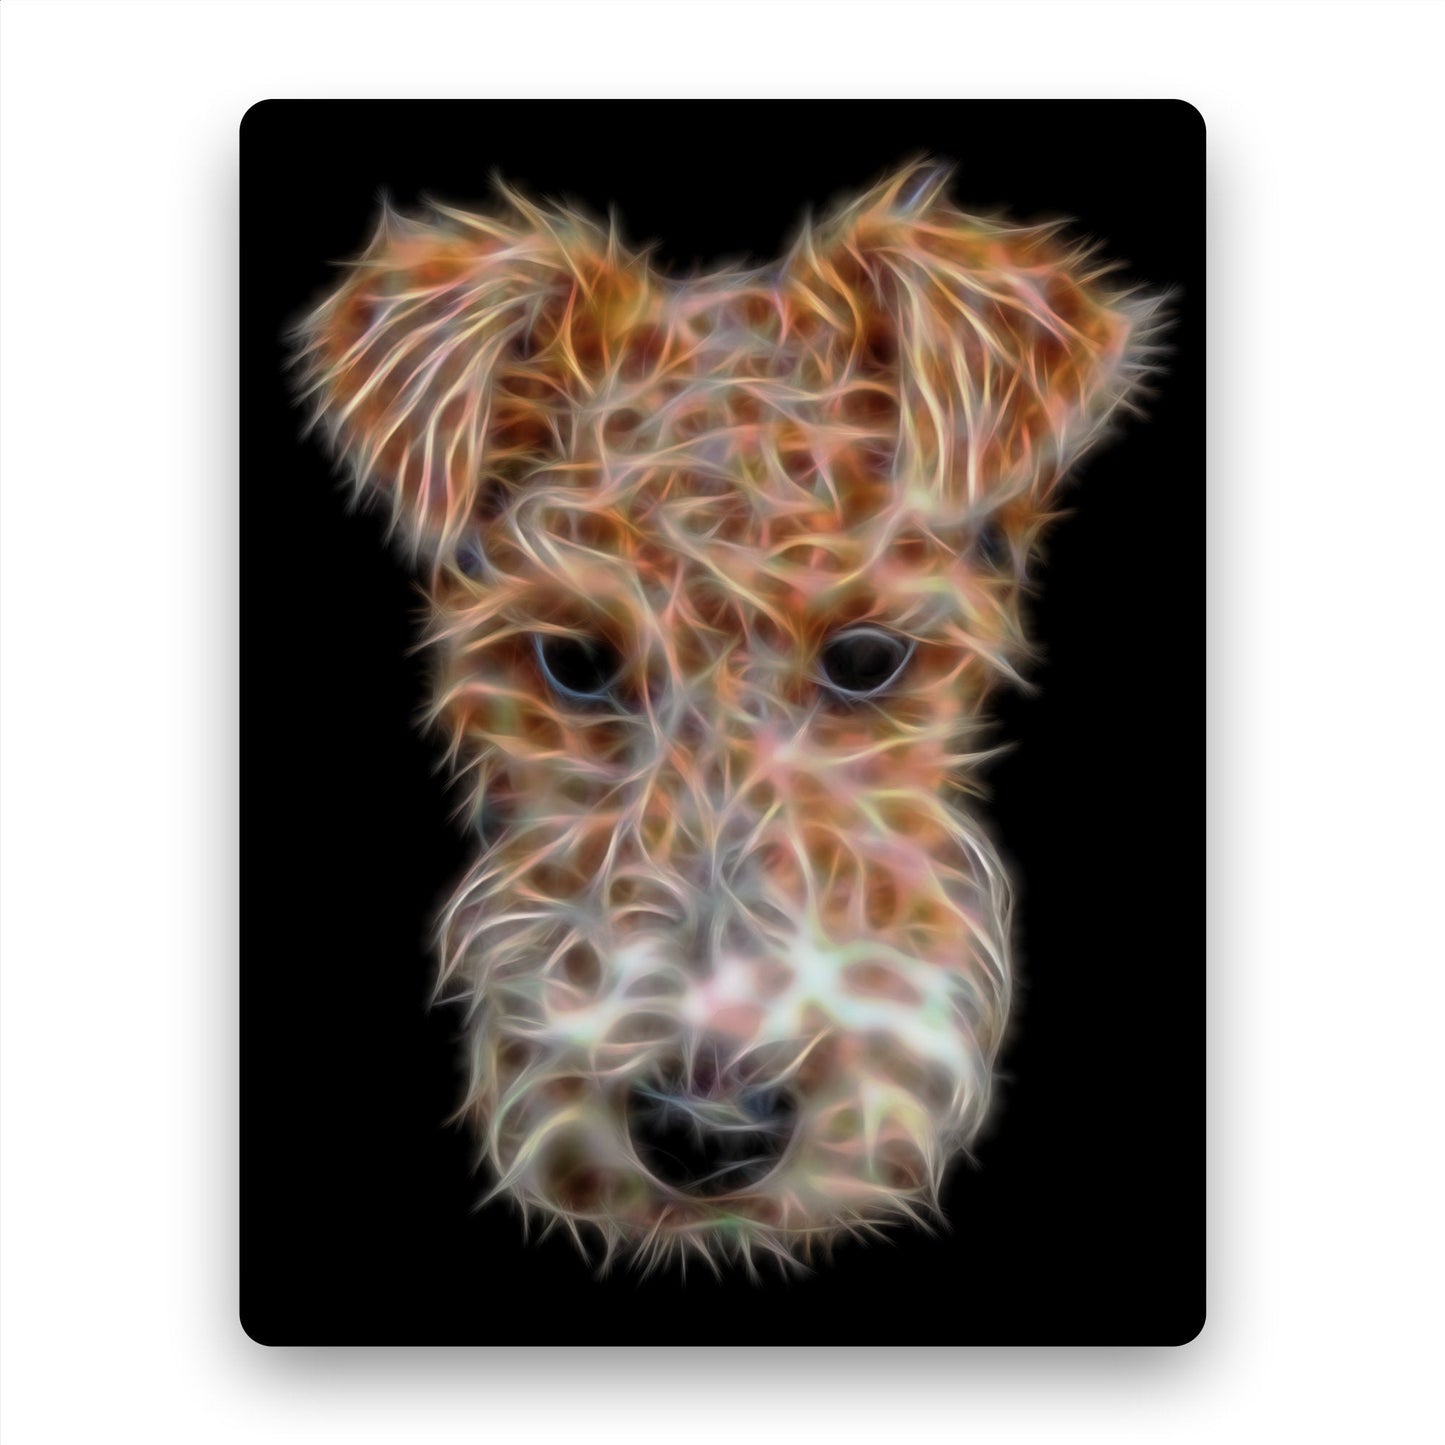 Wire Haired Fox Terrier Metal Wall Plaque with Stunning Fractal Art Design